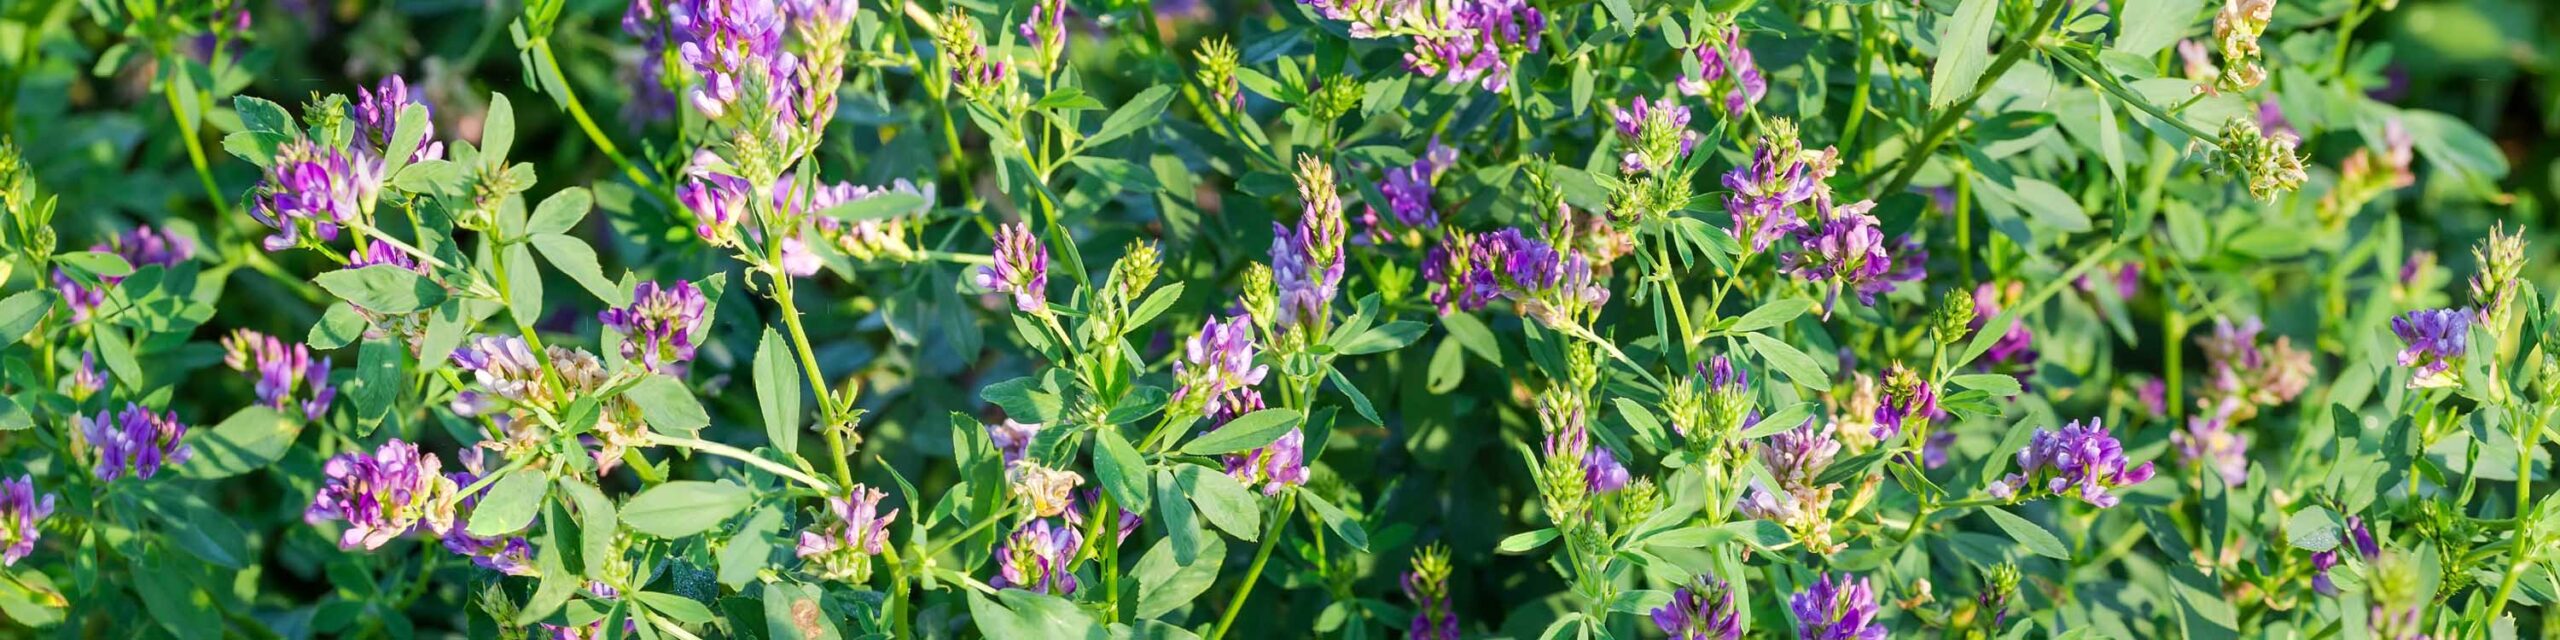 Close up of alfalfa plants with purple blooms.